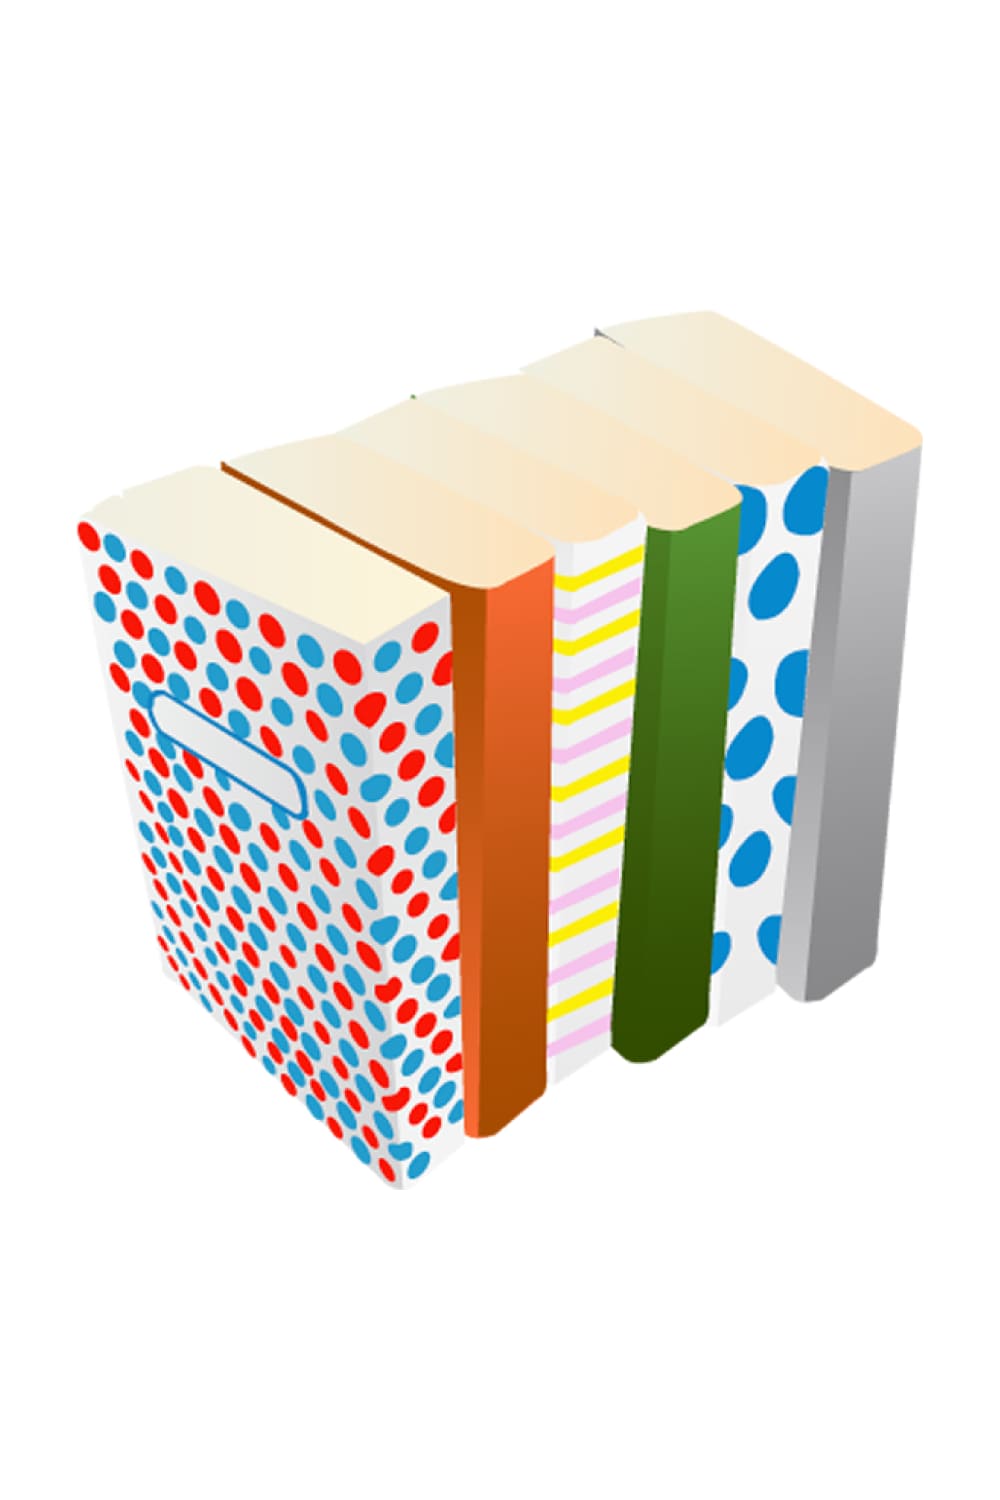 Stack of books with colorful covers.